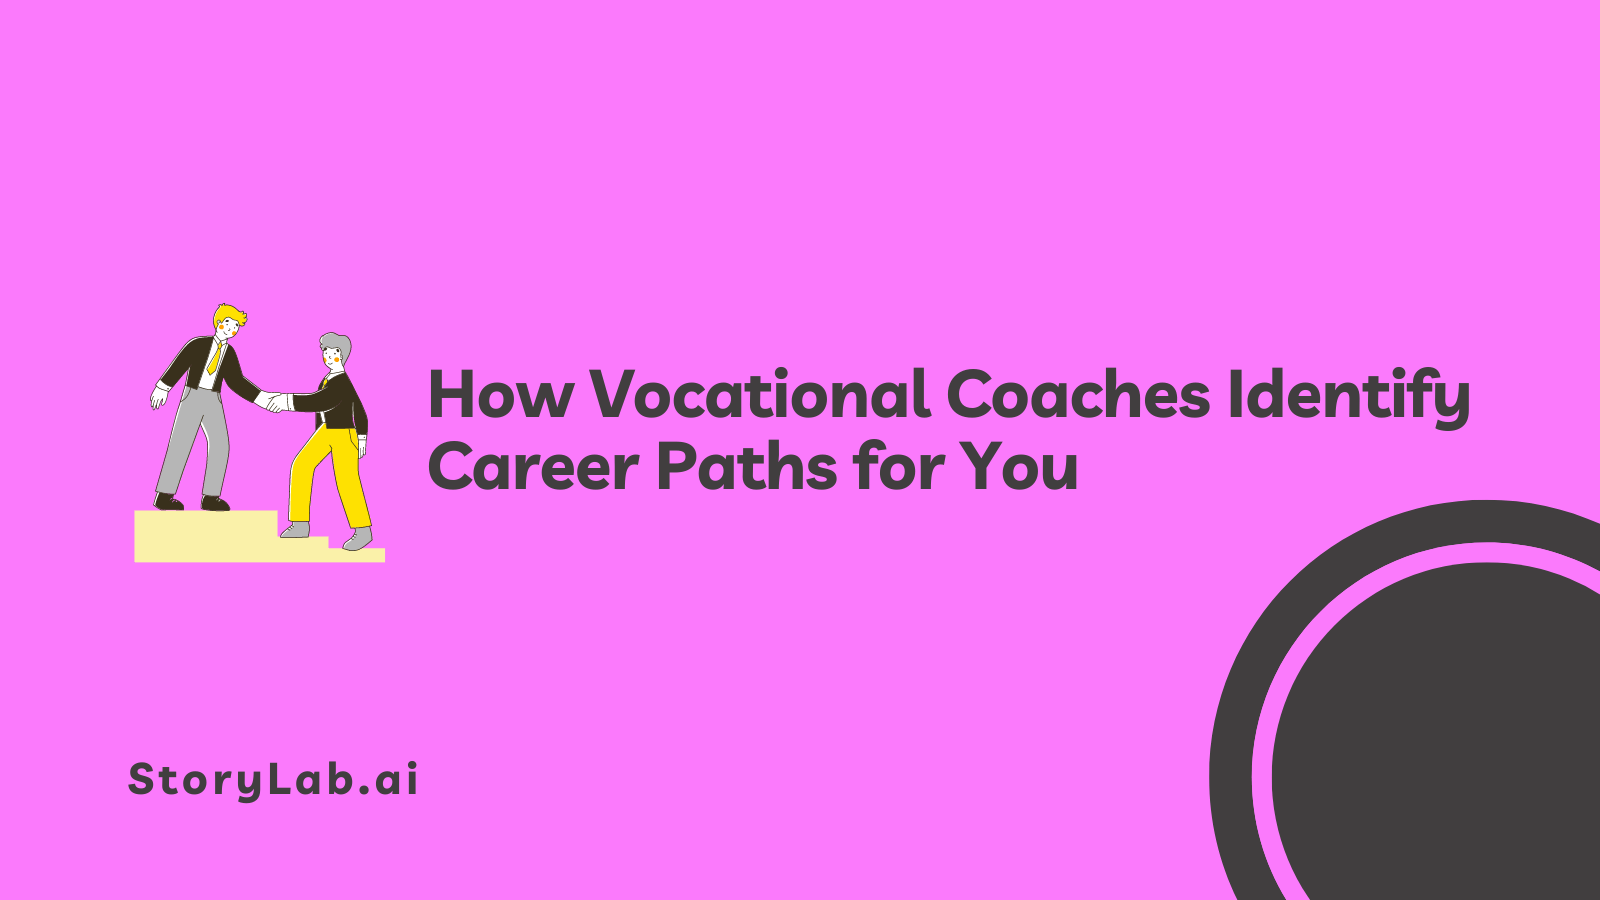 How Vocational Coaches Identify Career Paths for You